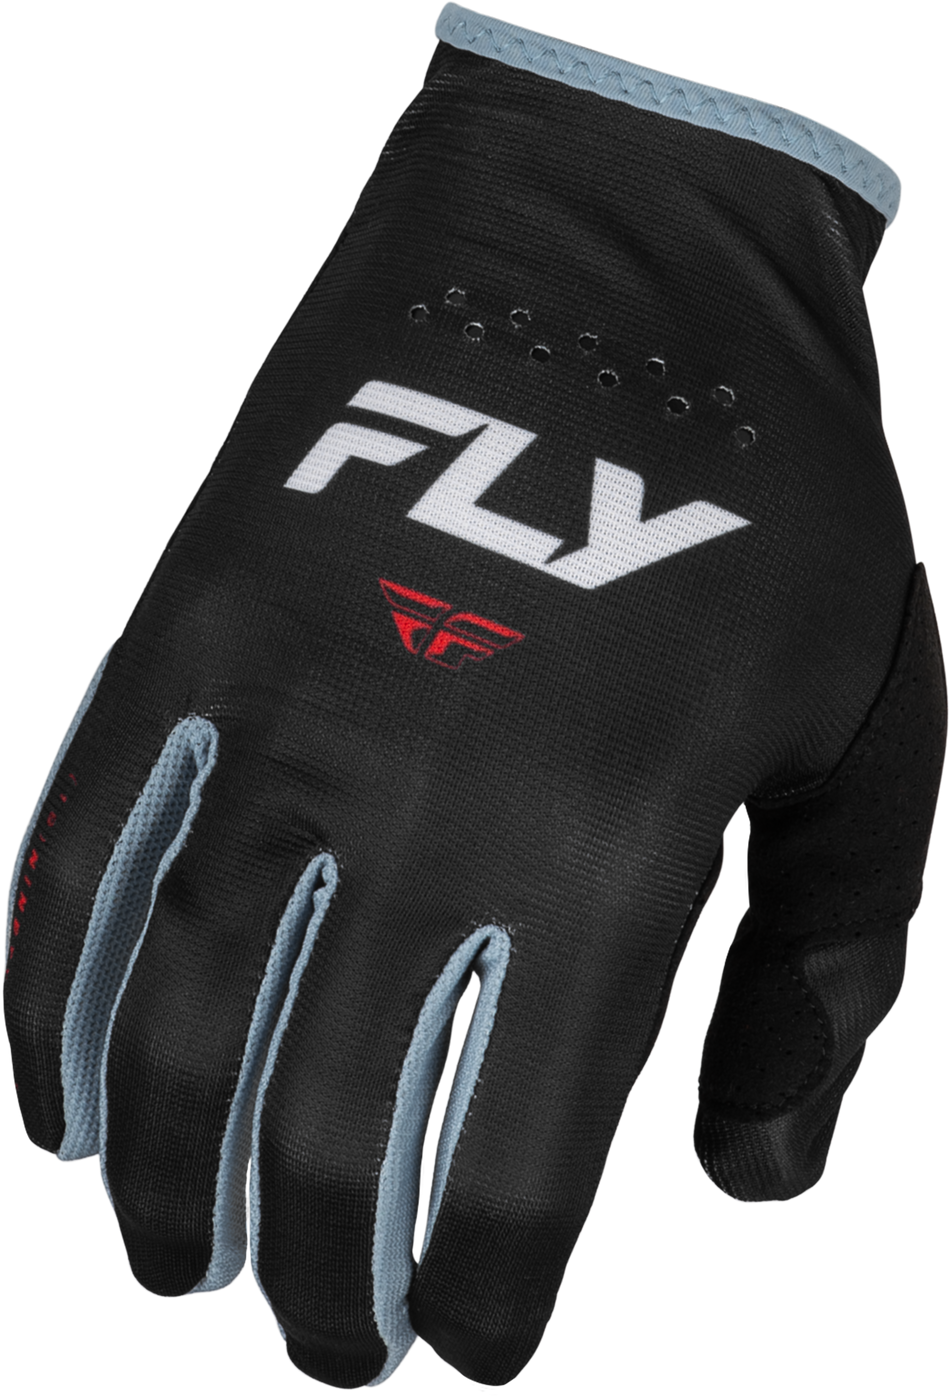 FLY RACING Lite Gloves Black/White/Red Sm 377-710S